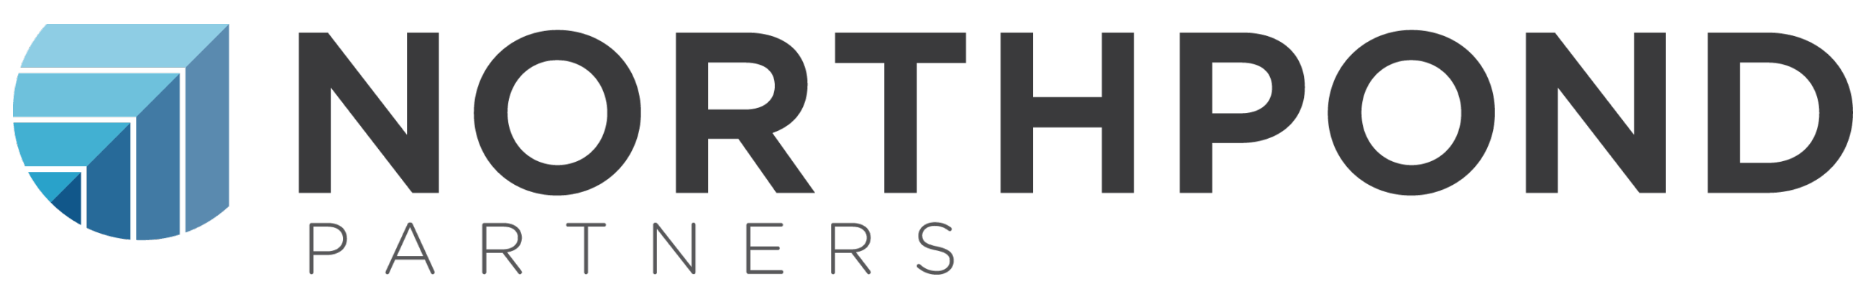 Northpond Partners